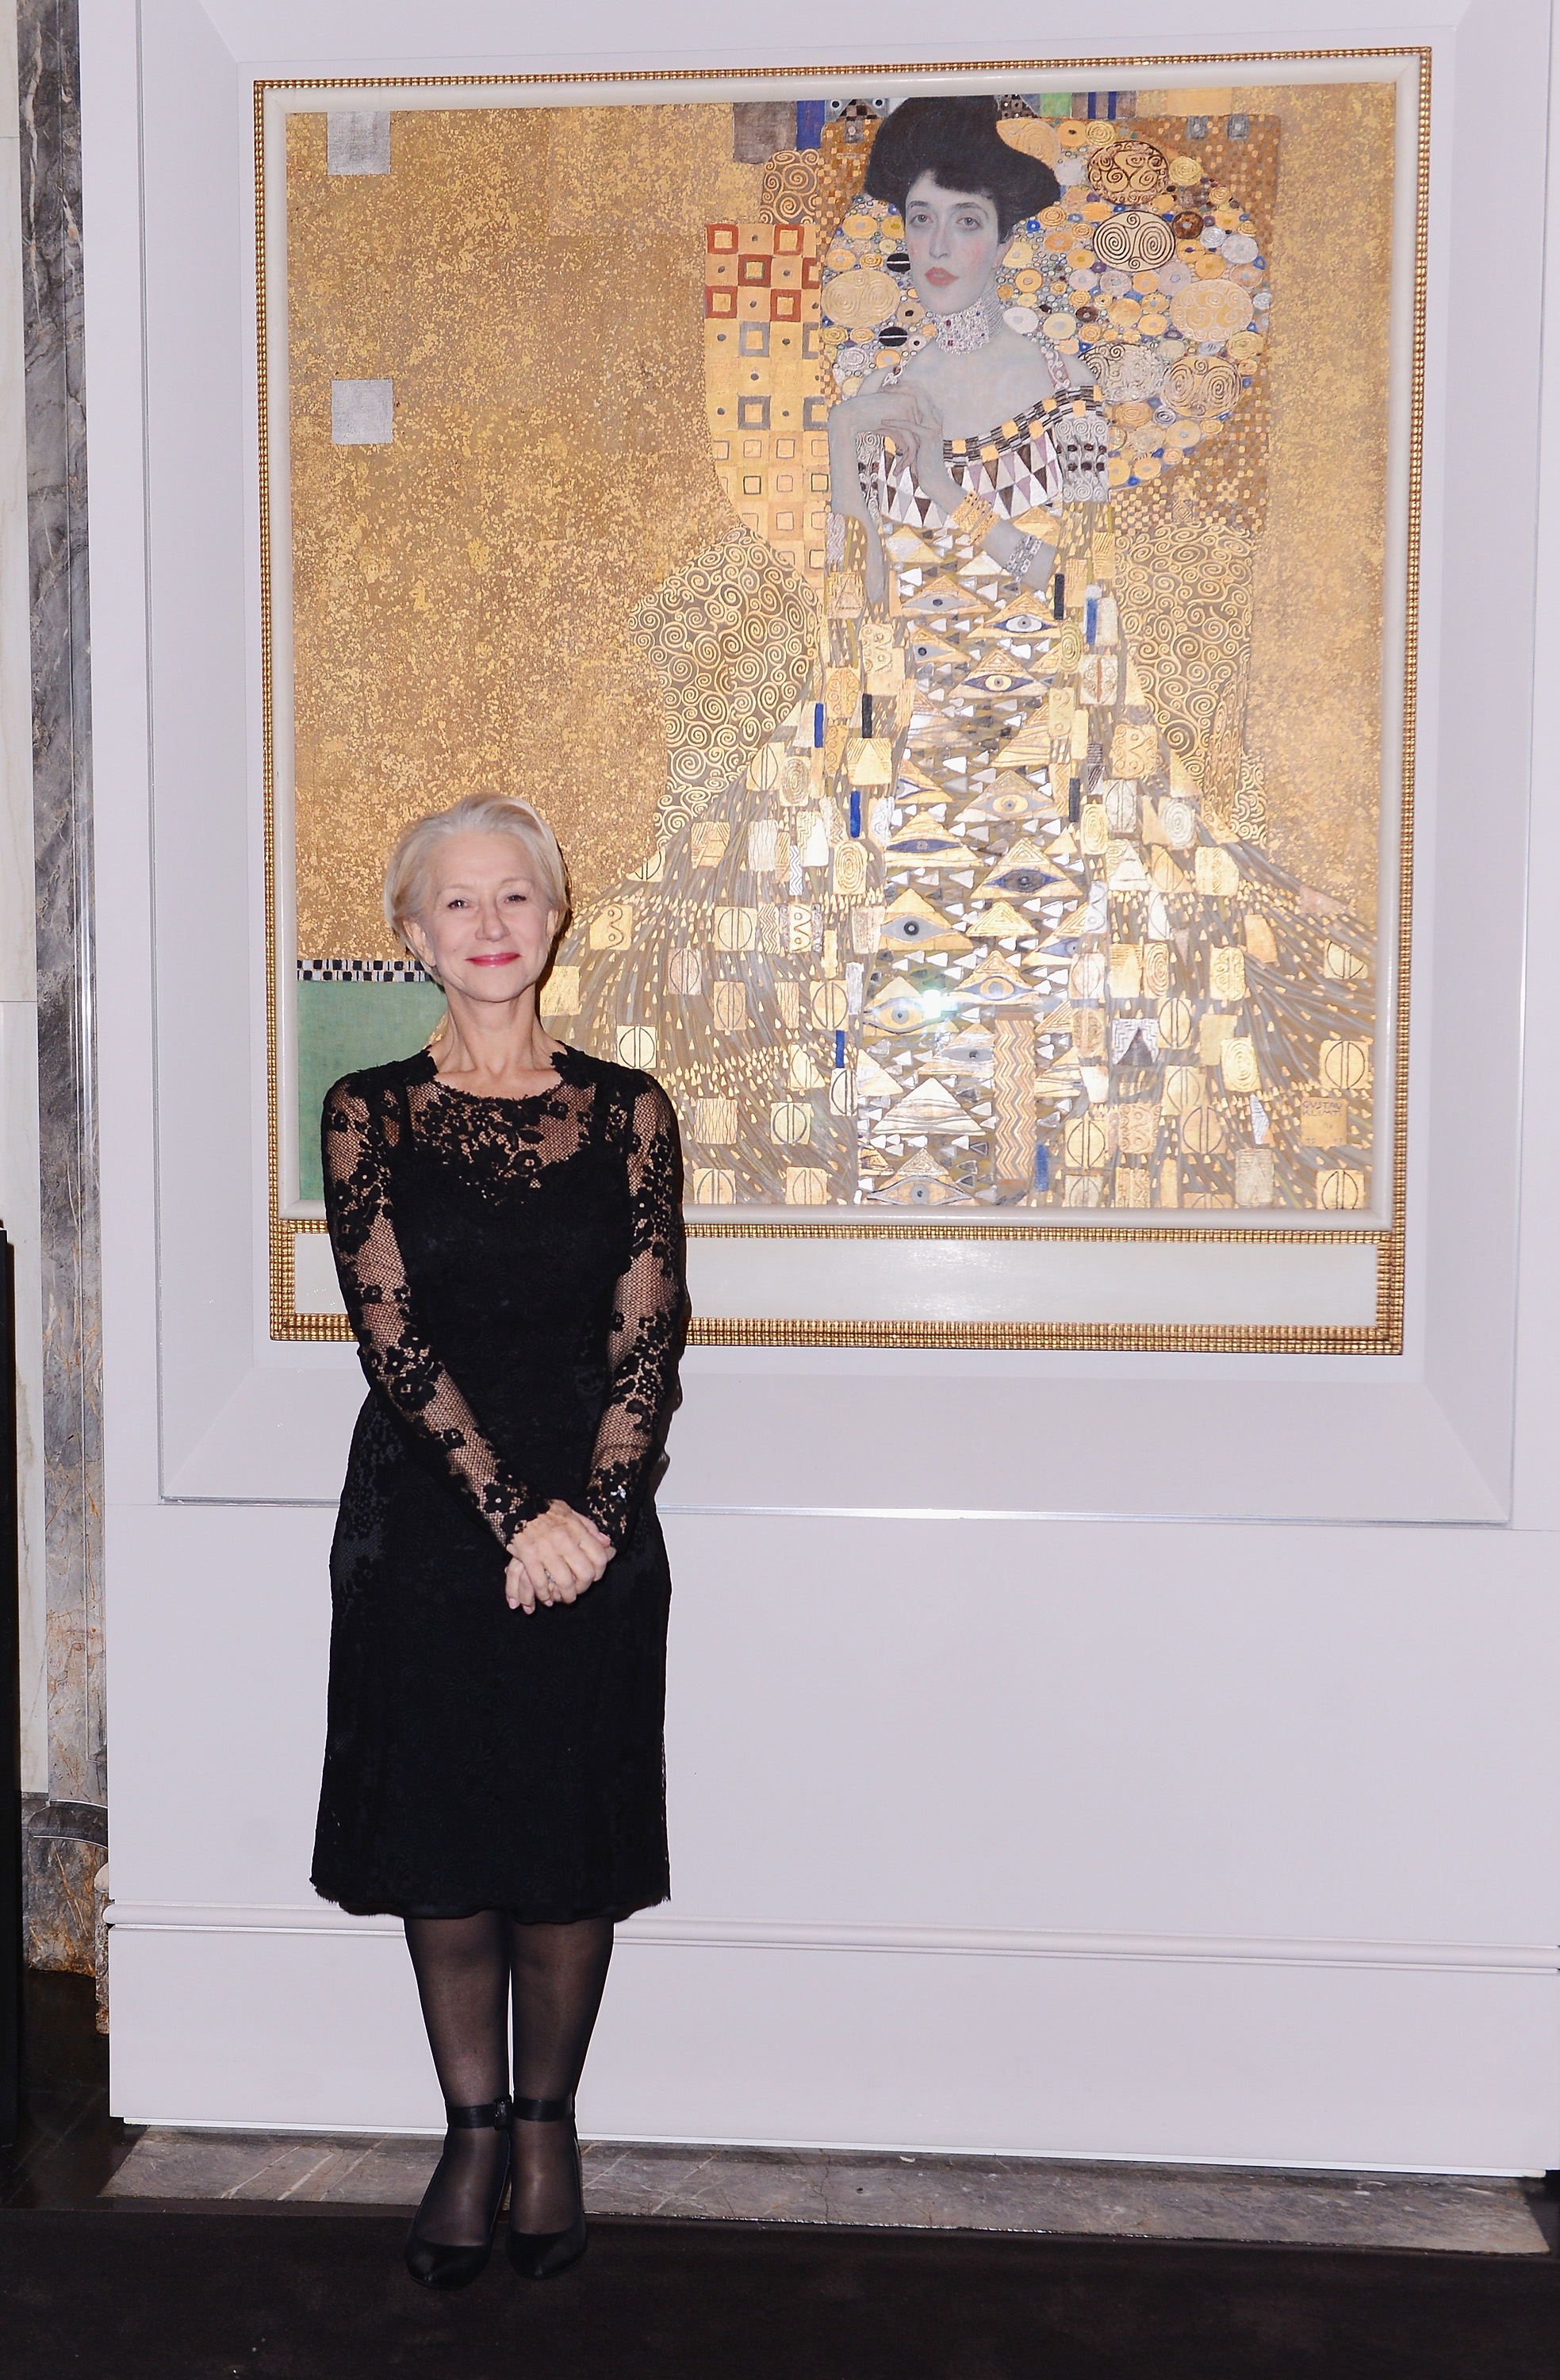 Private Screening Of The Weinstein Company's "Woman In Gold"